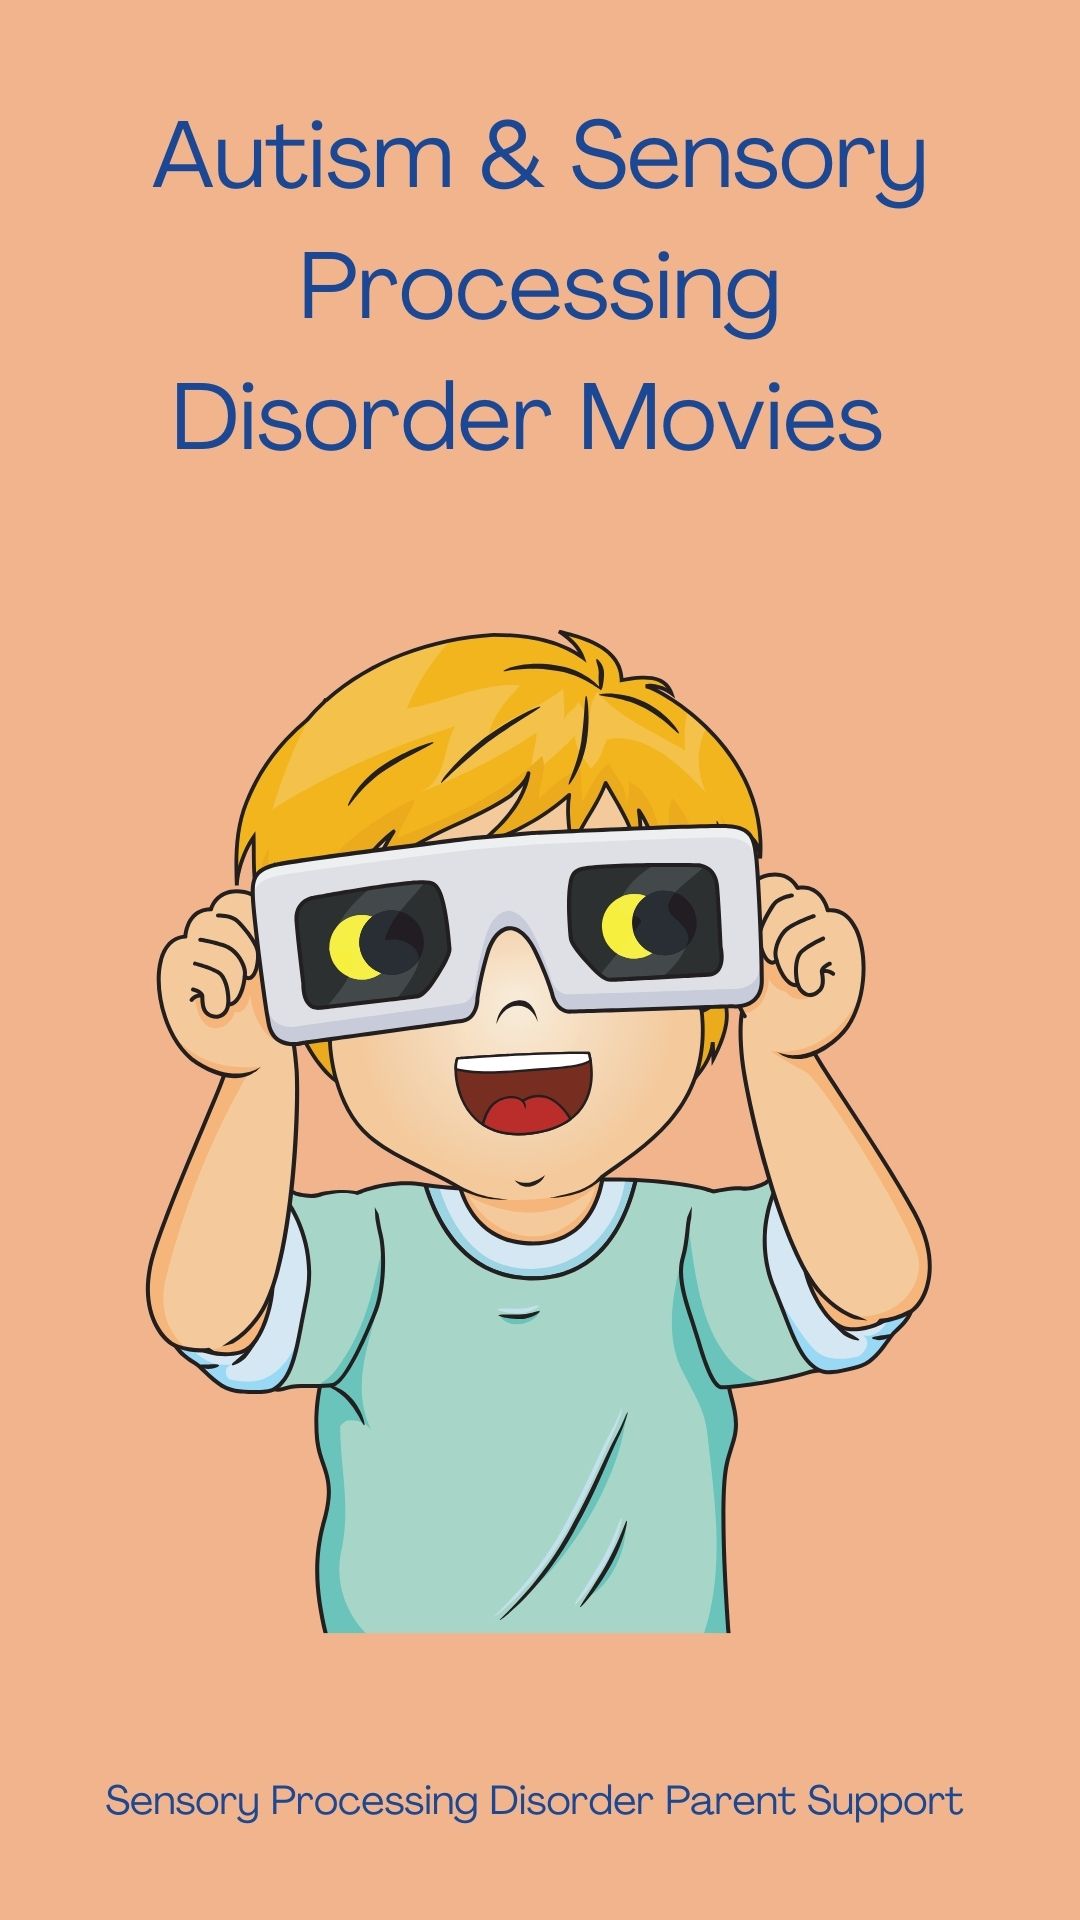 https://sensoryprocessingdisorderparentsupport.com/autism-and-sensory-processing-disorder-movies/